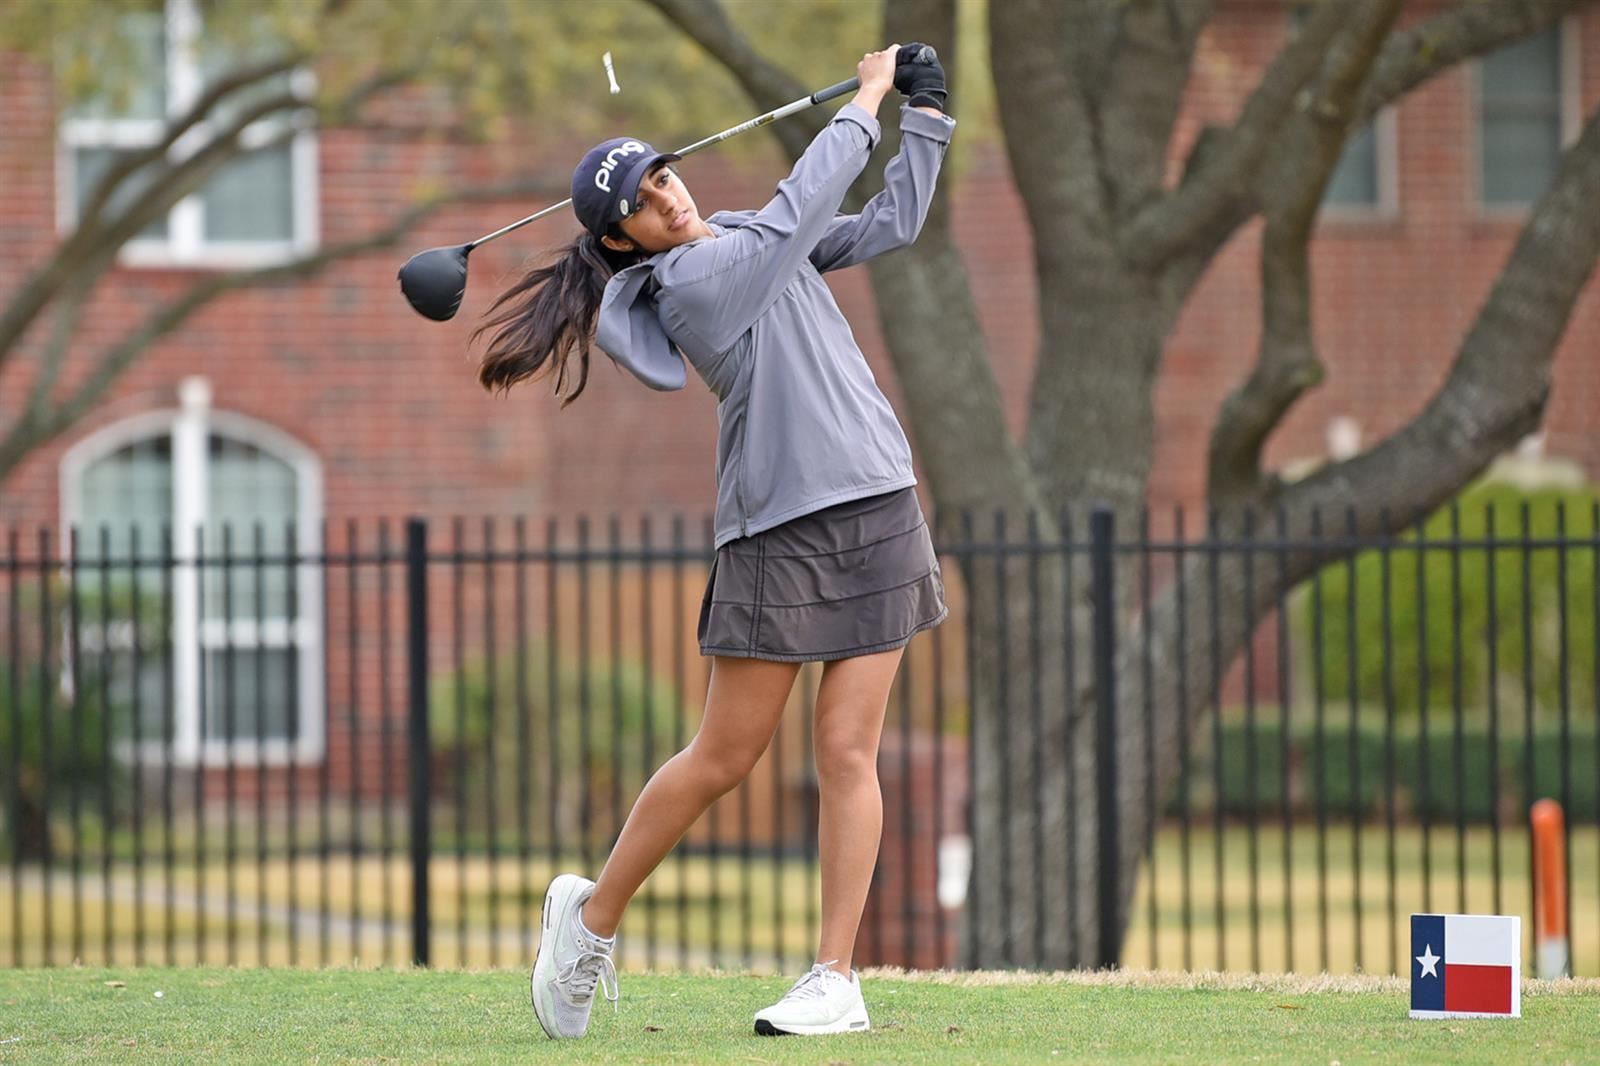 Cy-Fair junior Ashleen Kaur shot a two-round total of 144 to place third at the District 17-6A Girls’ Golf Tournament.